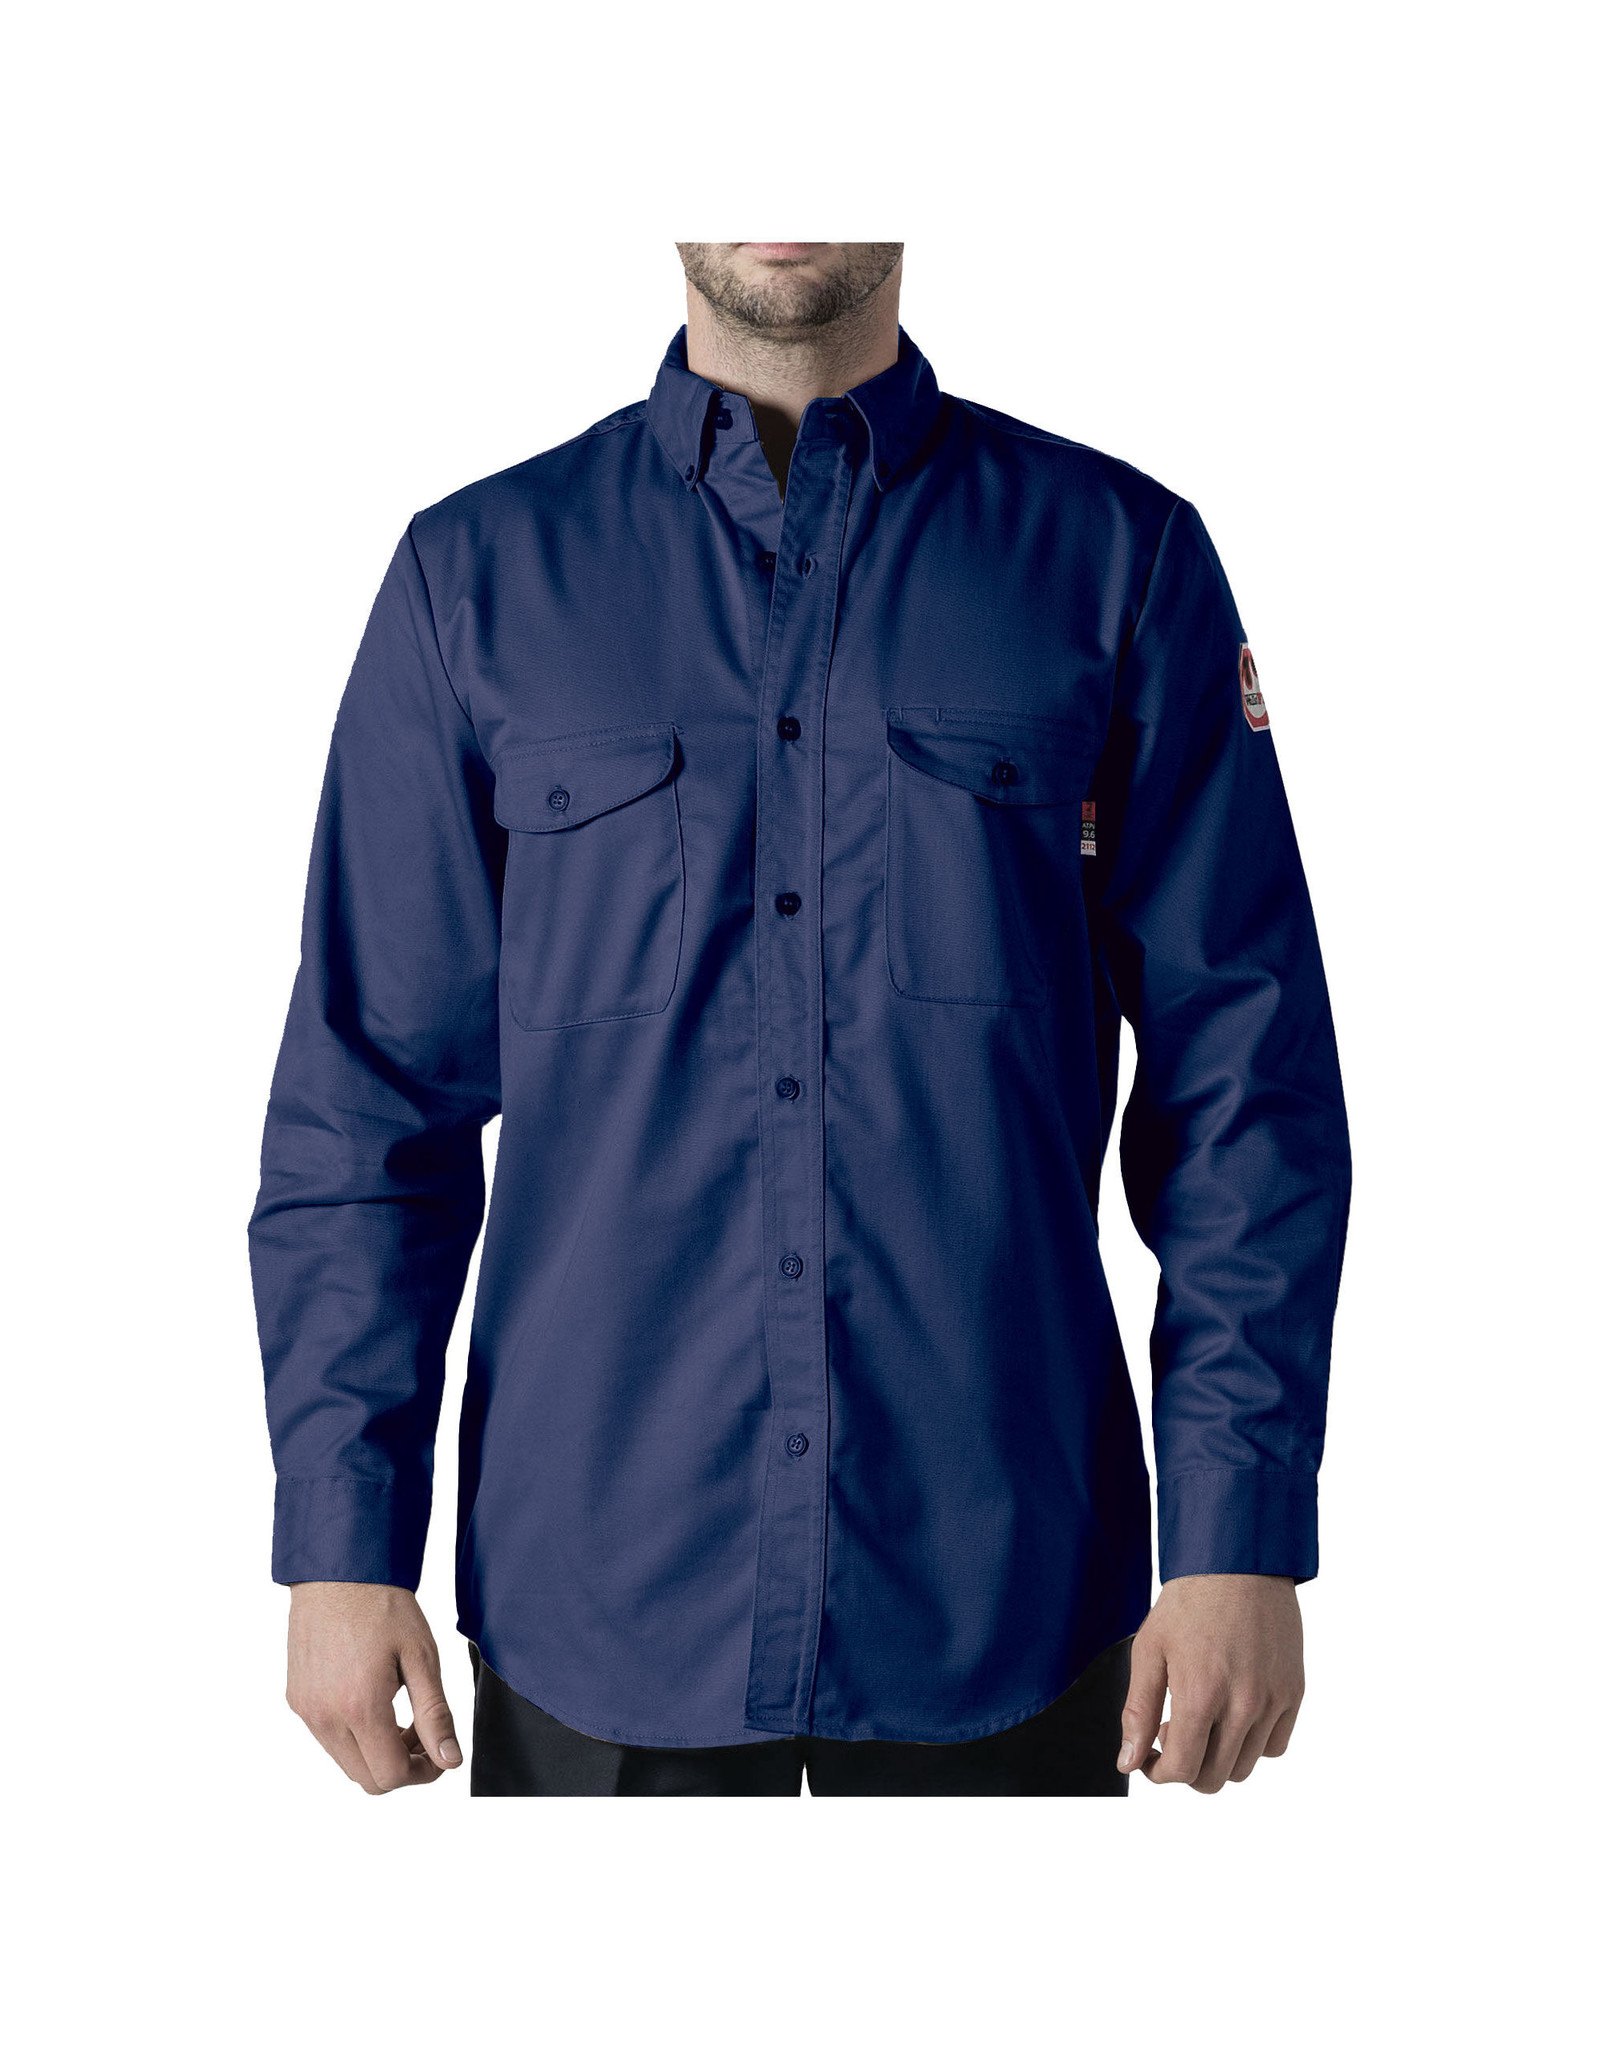 Walls Flame Resistant Button-Down Work Shirt